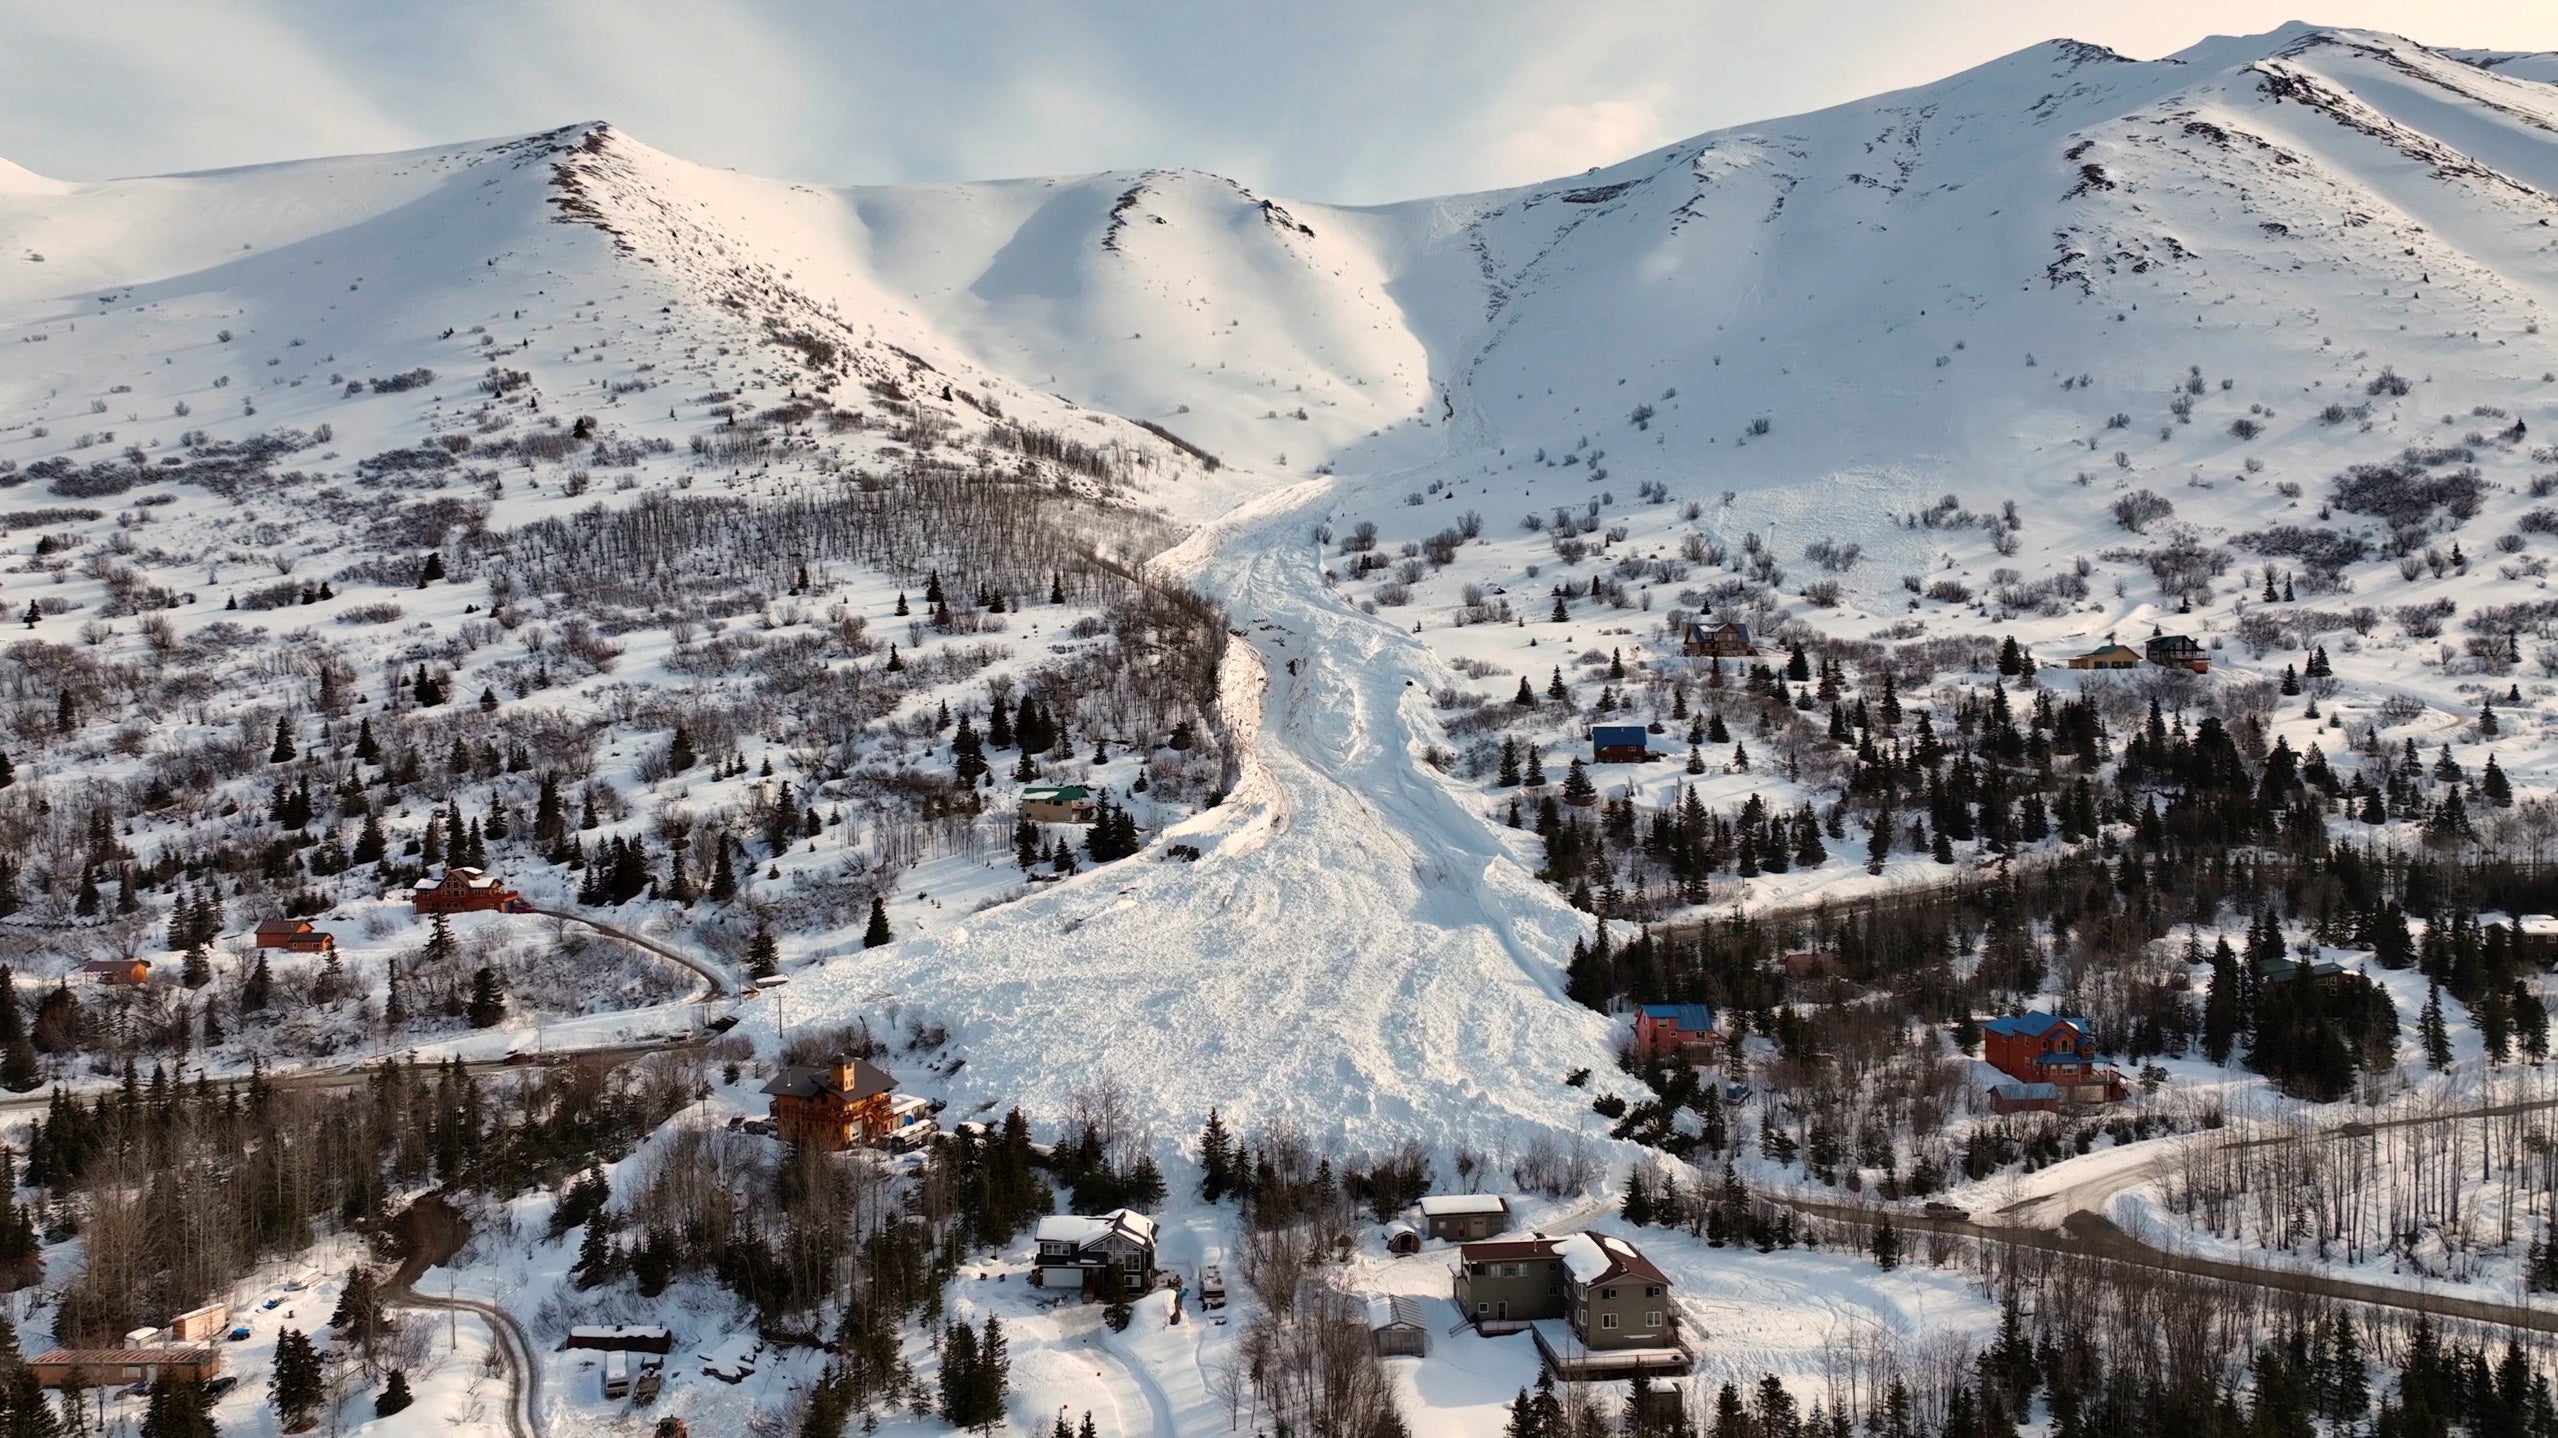 Drone footage shows the aftermath of an avalanche down a mountainside at Hiland Road in Anchorage, Alaska on March 27